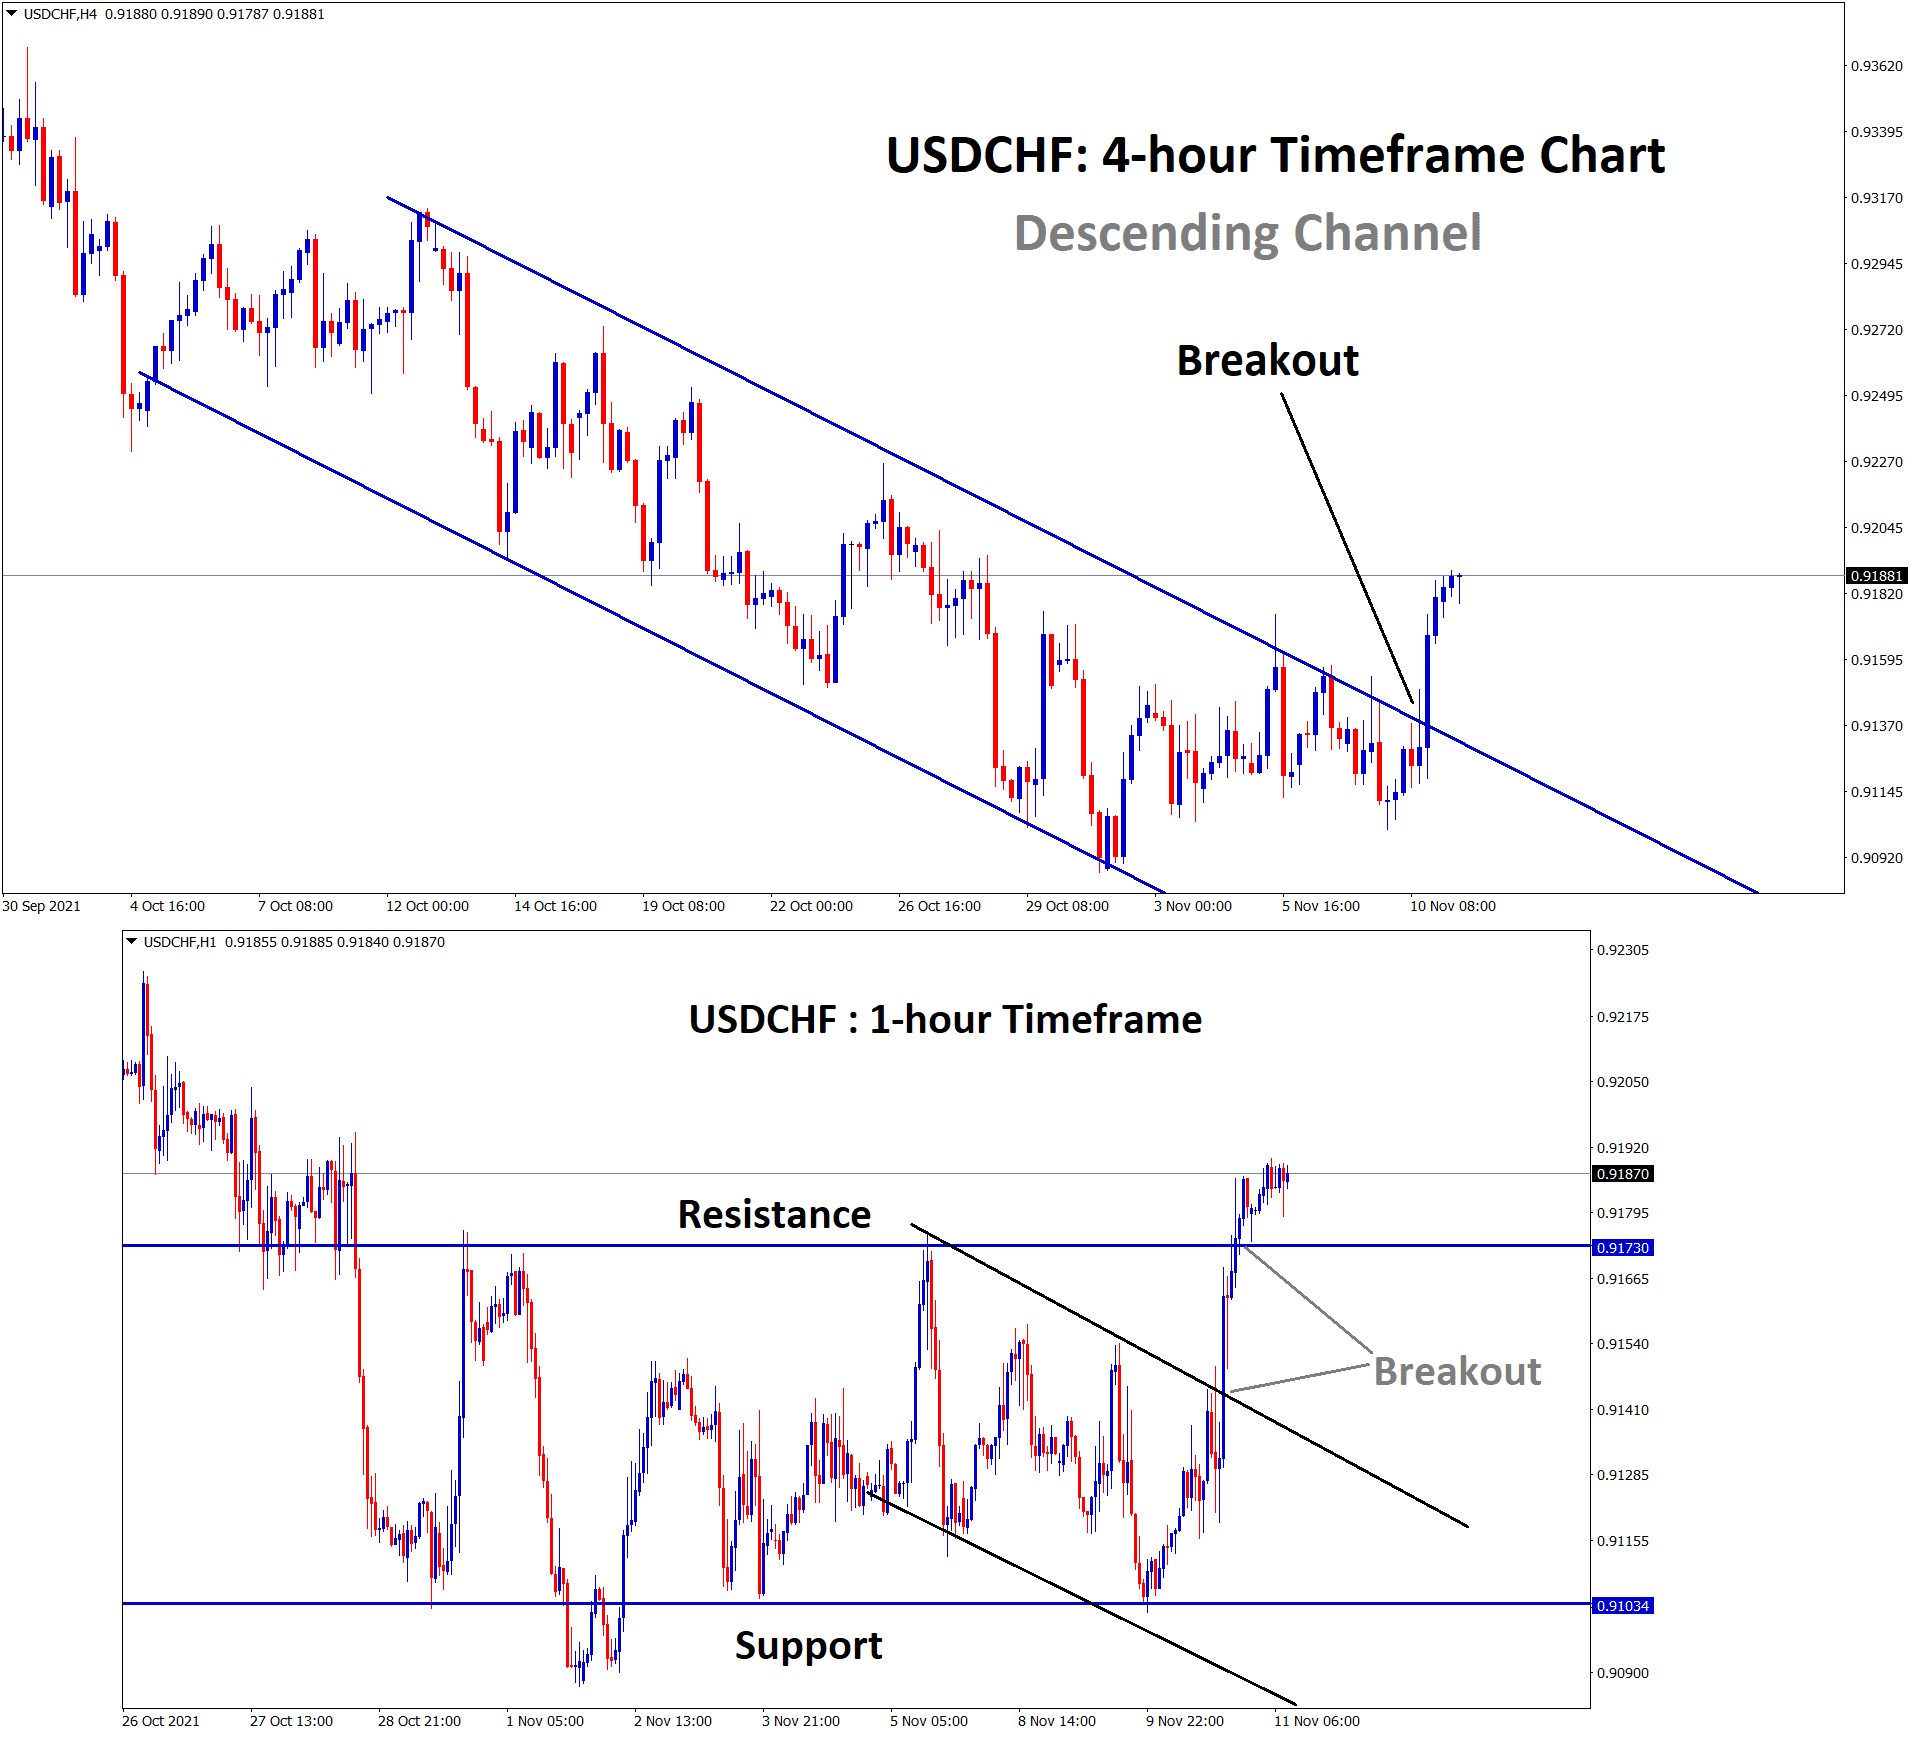 USDCHF has broken the top price levels continuously